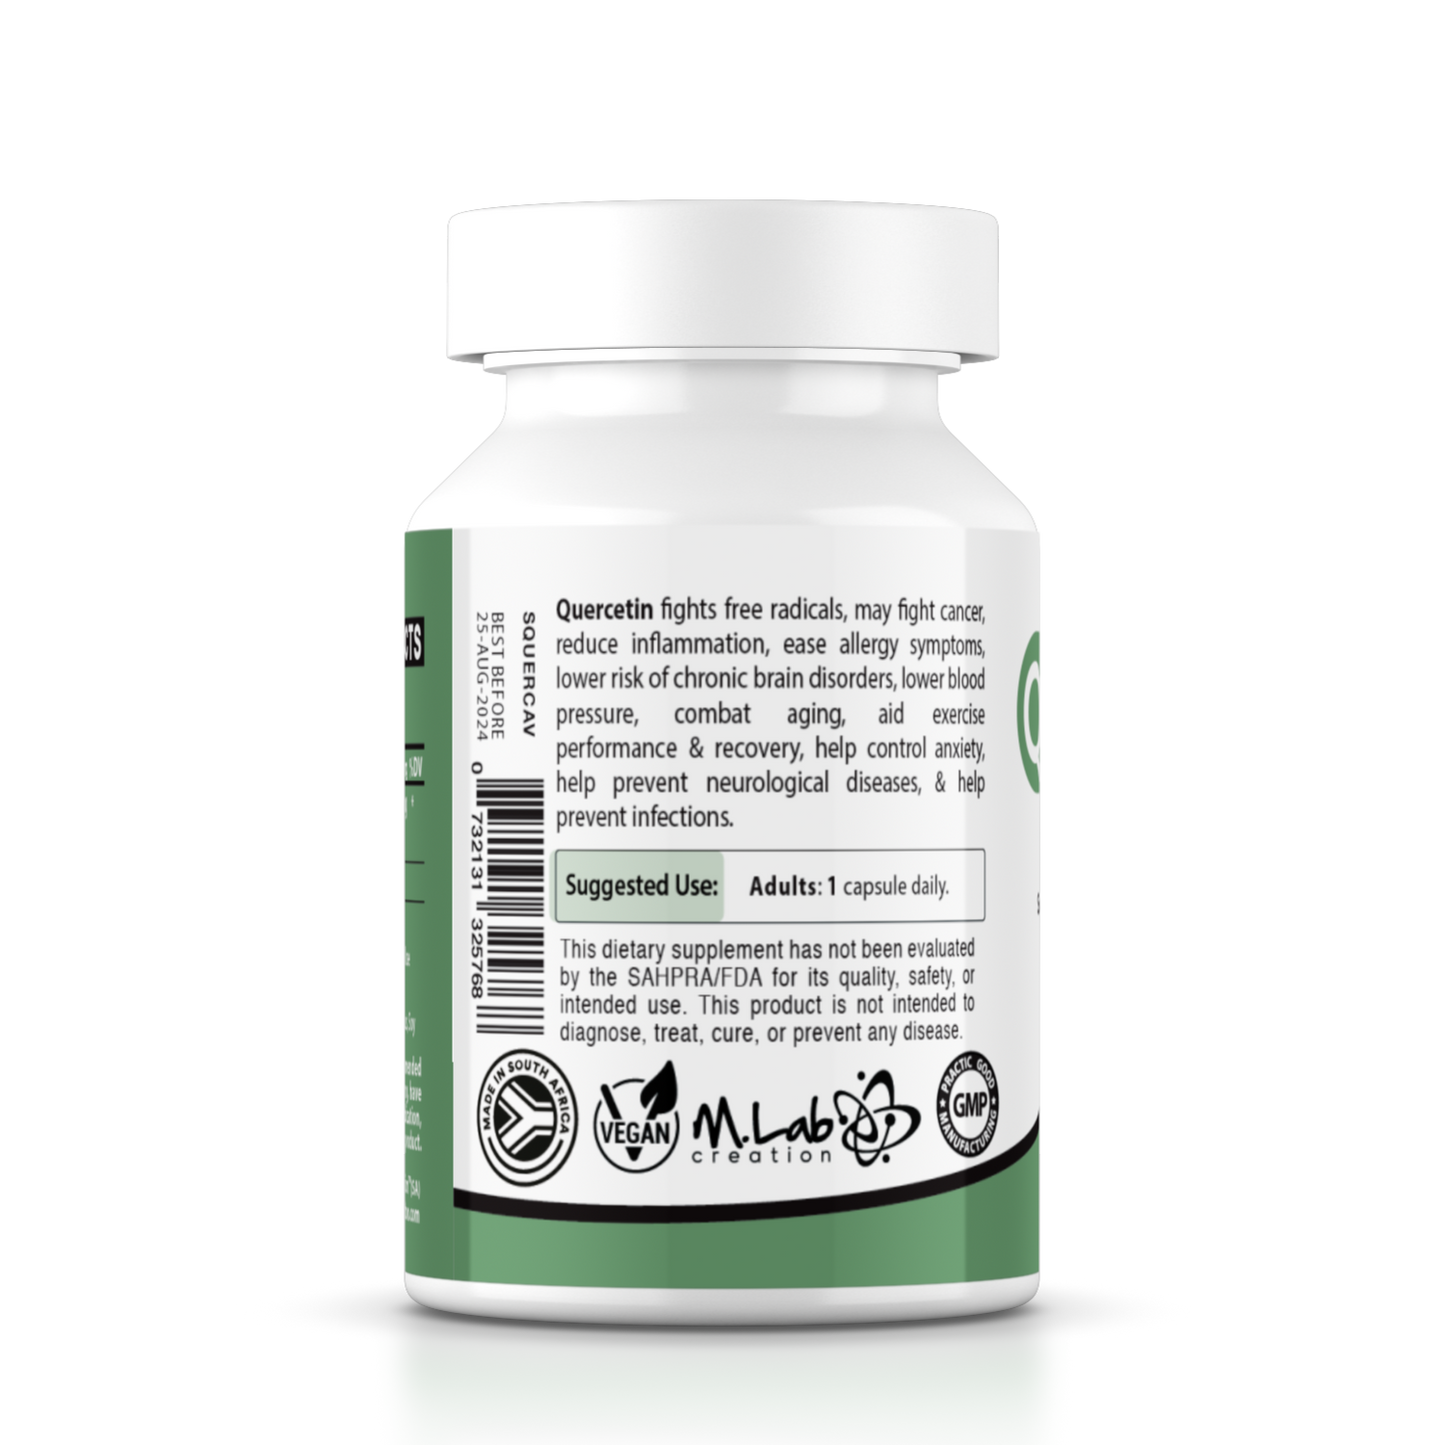 Quercetin (98%) 800mg - From Sophora Japonica Extract